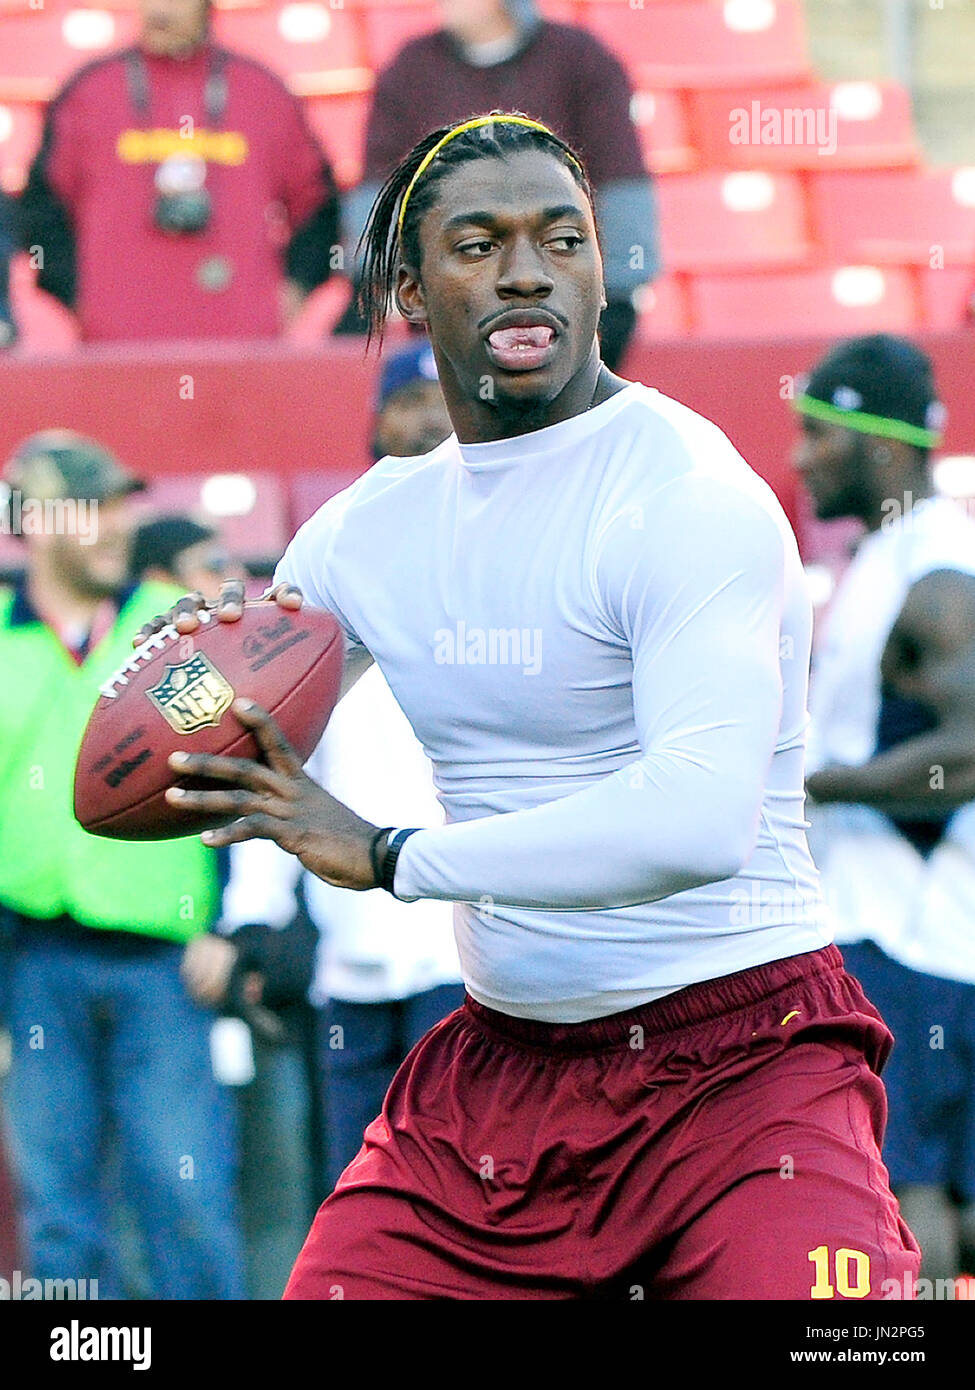 Washington Redskins quarterback Robert Griffin III (10) warms-up prior to the an NFC Wild-card play-off game against the Seattle Seahawks at FedEx Field in Landover, Maryland on Sunday, January 6, 2013..Credit: Ron Sachs / CNP Stock Photo